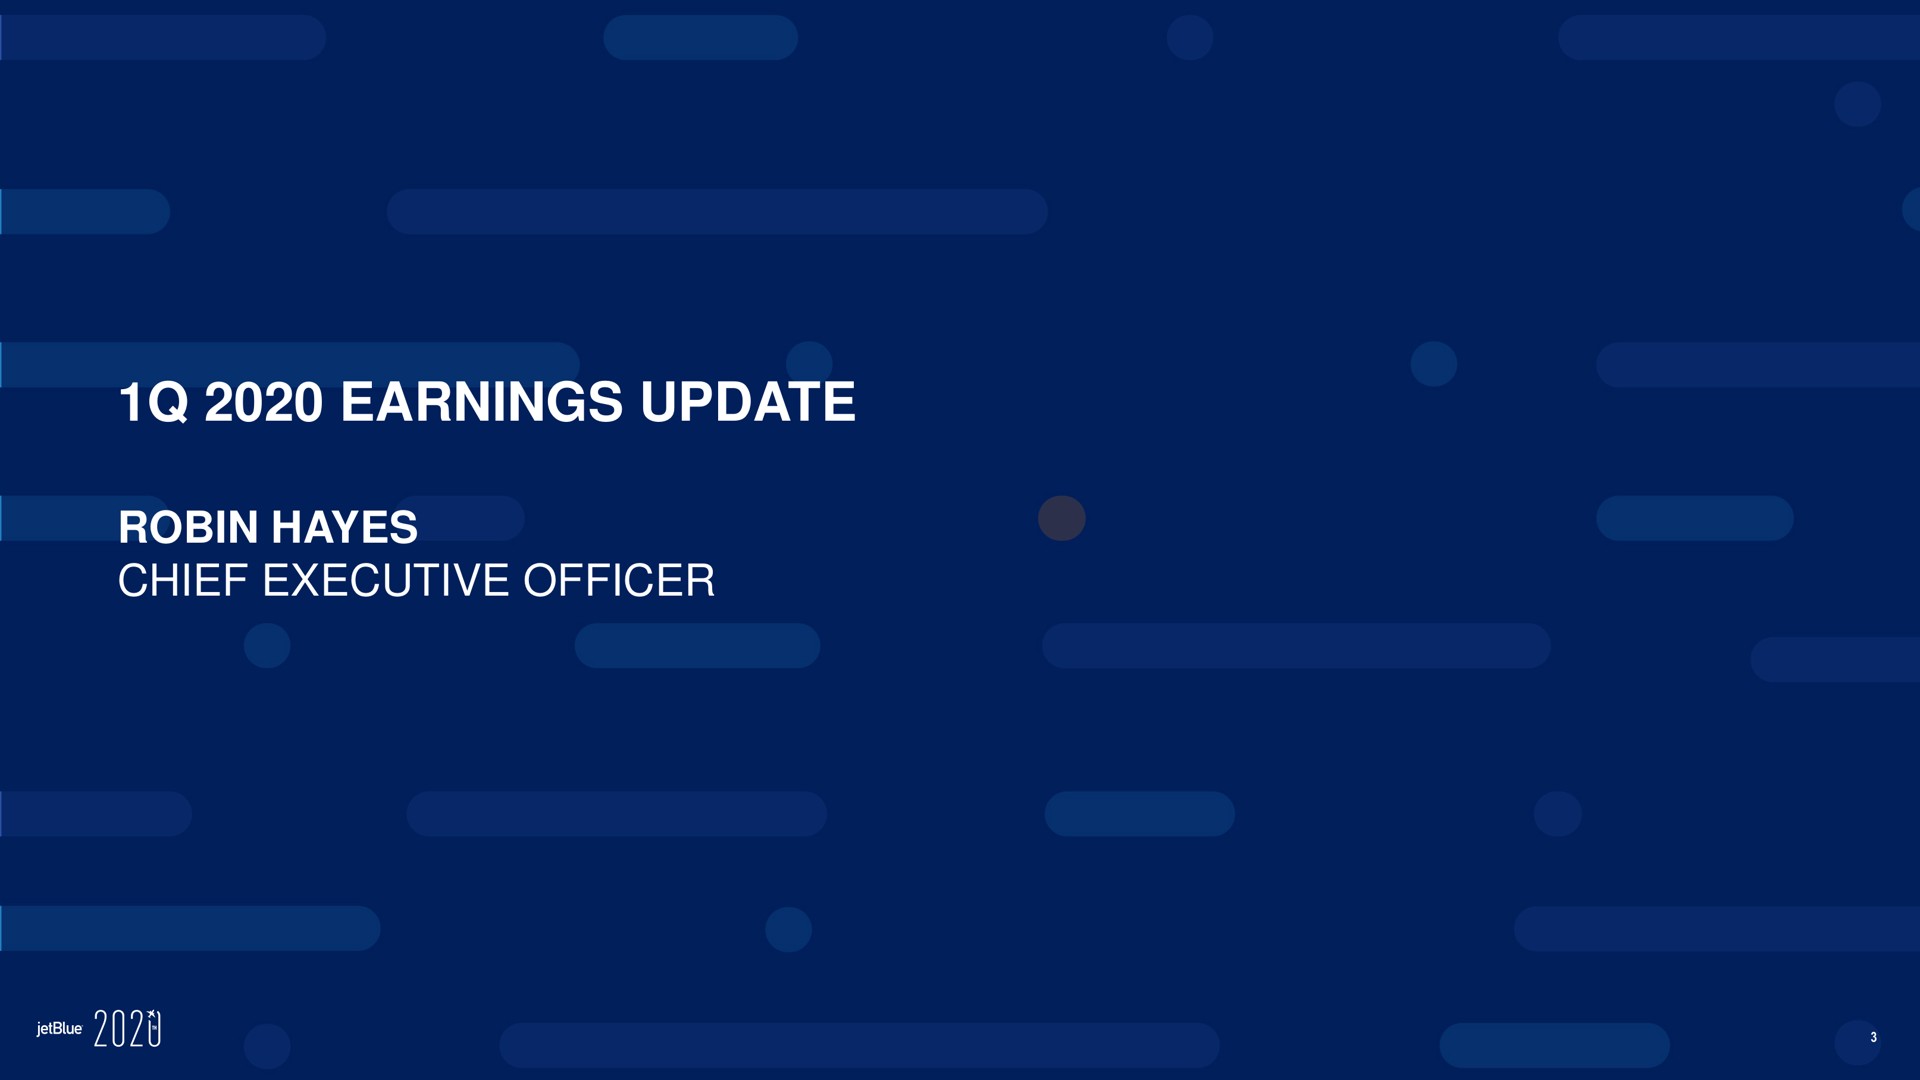 earnings update robin hayes chief executive officer sew | jetBlue